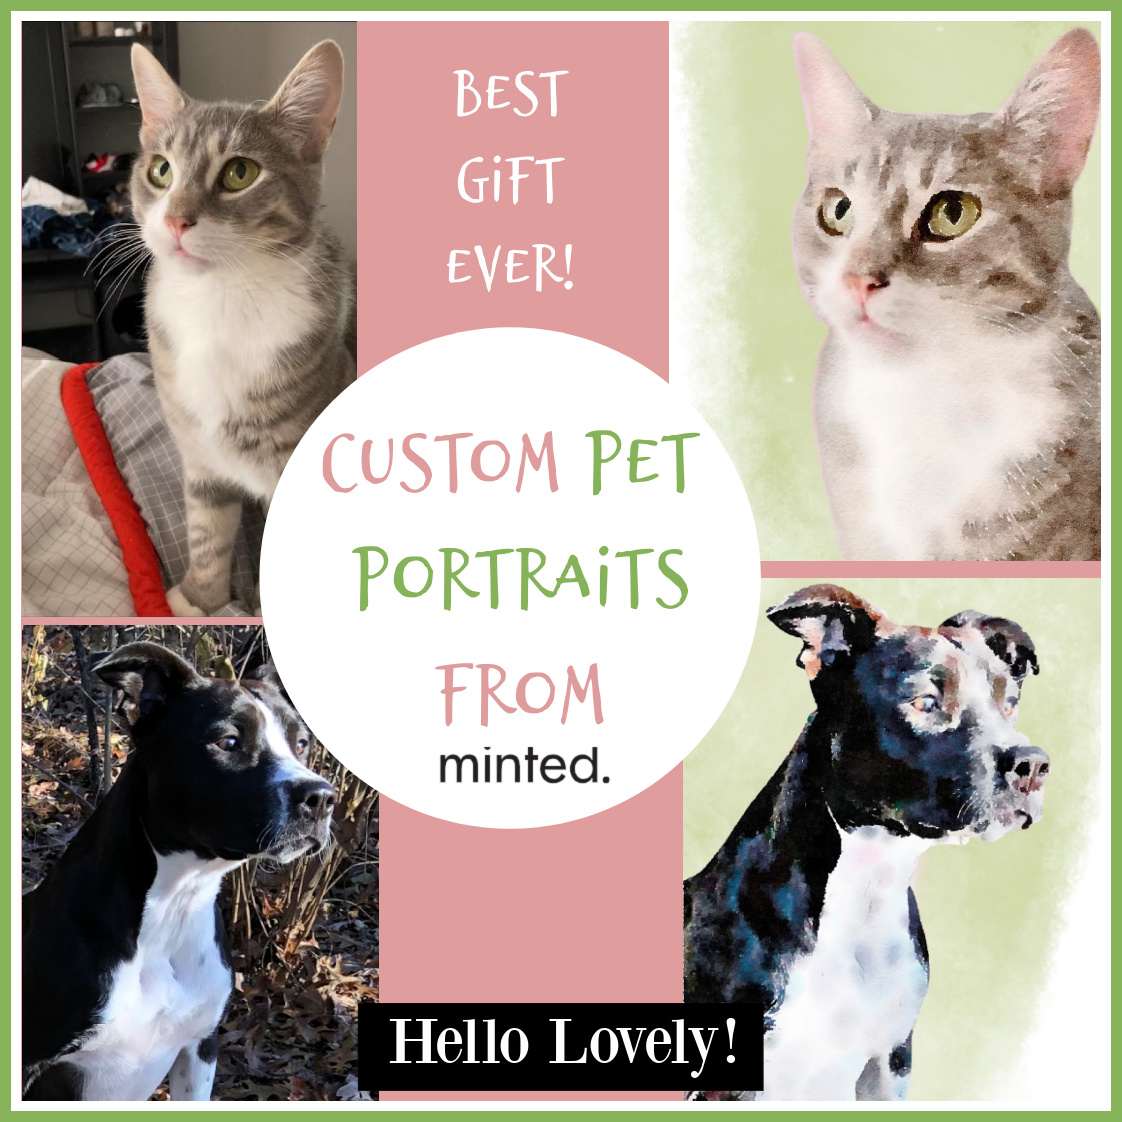 Best give ever custom pet portraits from minted - Hello Lovely Studio. #petportraits #petwatercolors